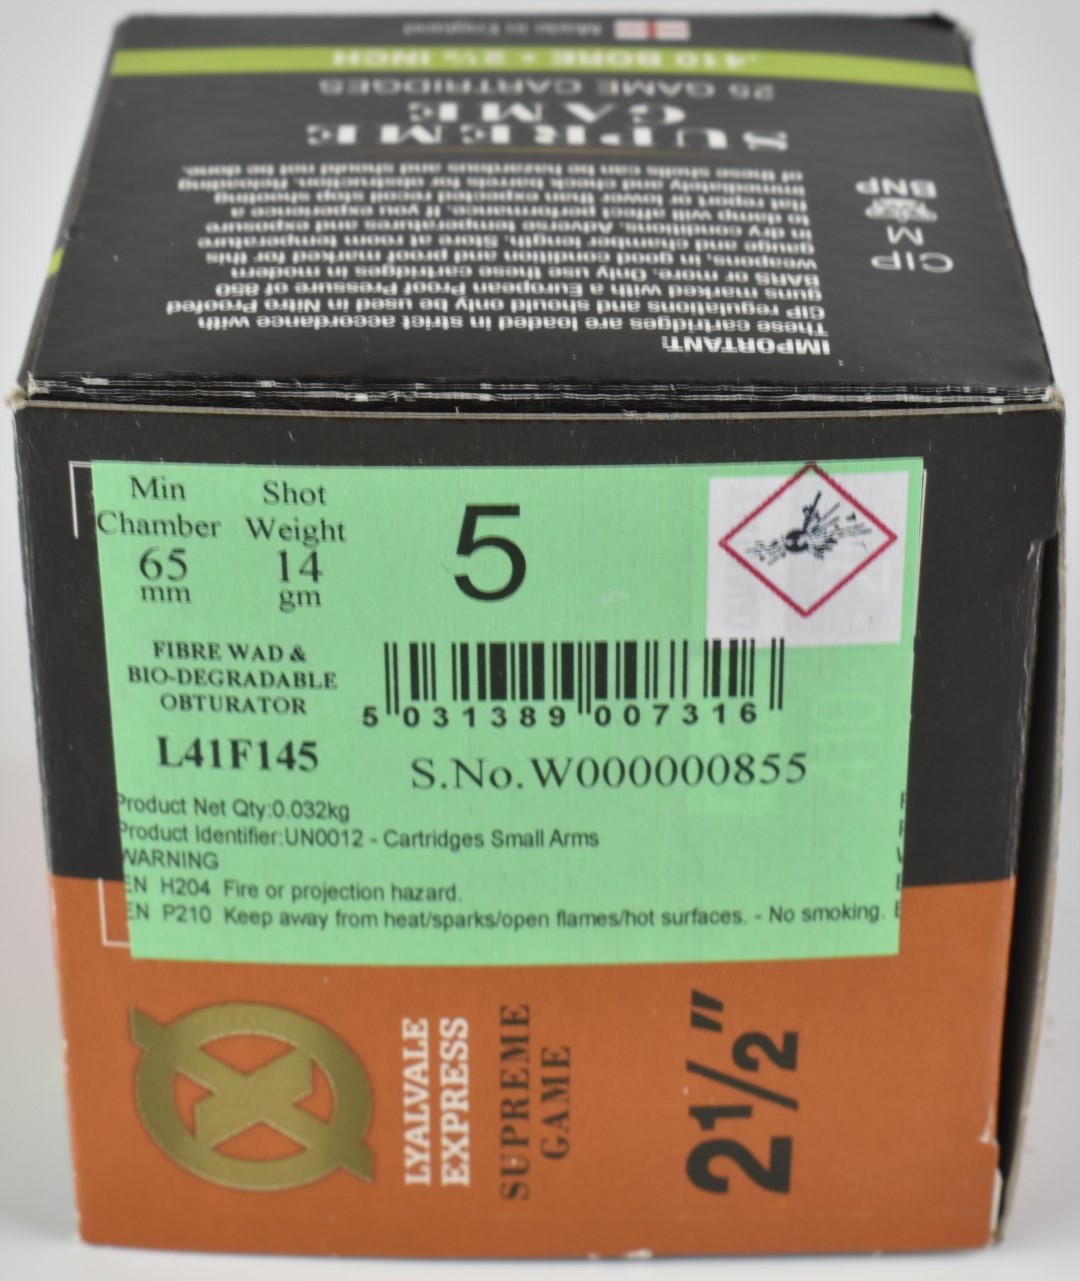 Five-hundred-and-fifty .410 Lyalvale Express shotgun cartridges, all in original boxes PLEASE NOTE - Image 10 of 14